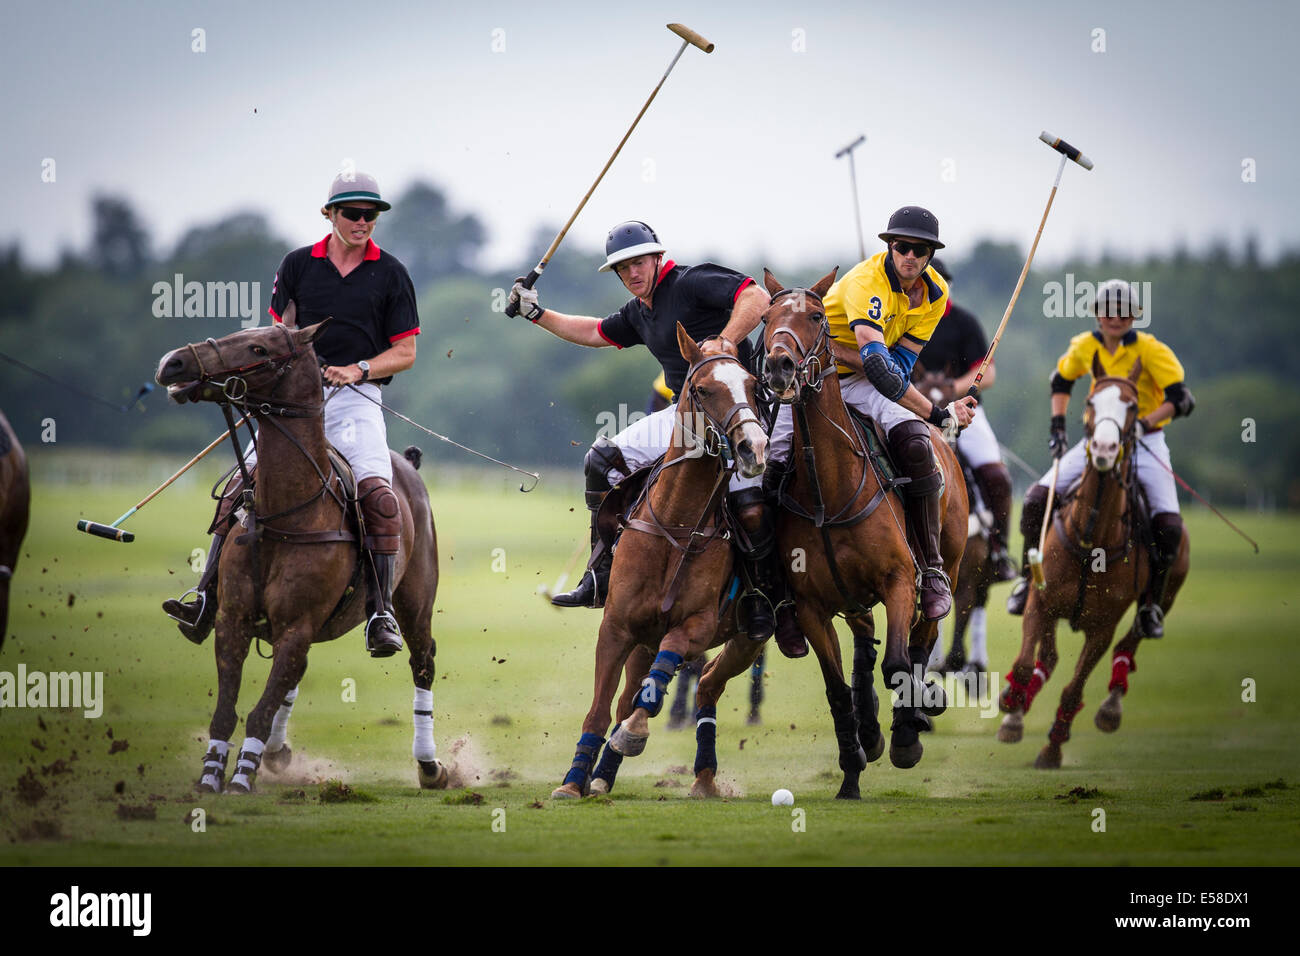 Derek Bratley competes with Nick Pepper to gain control of the ball during a hard faught polo game at Cowdray Park. Stock Photo